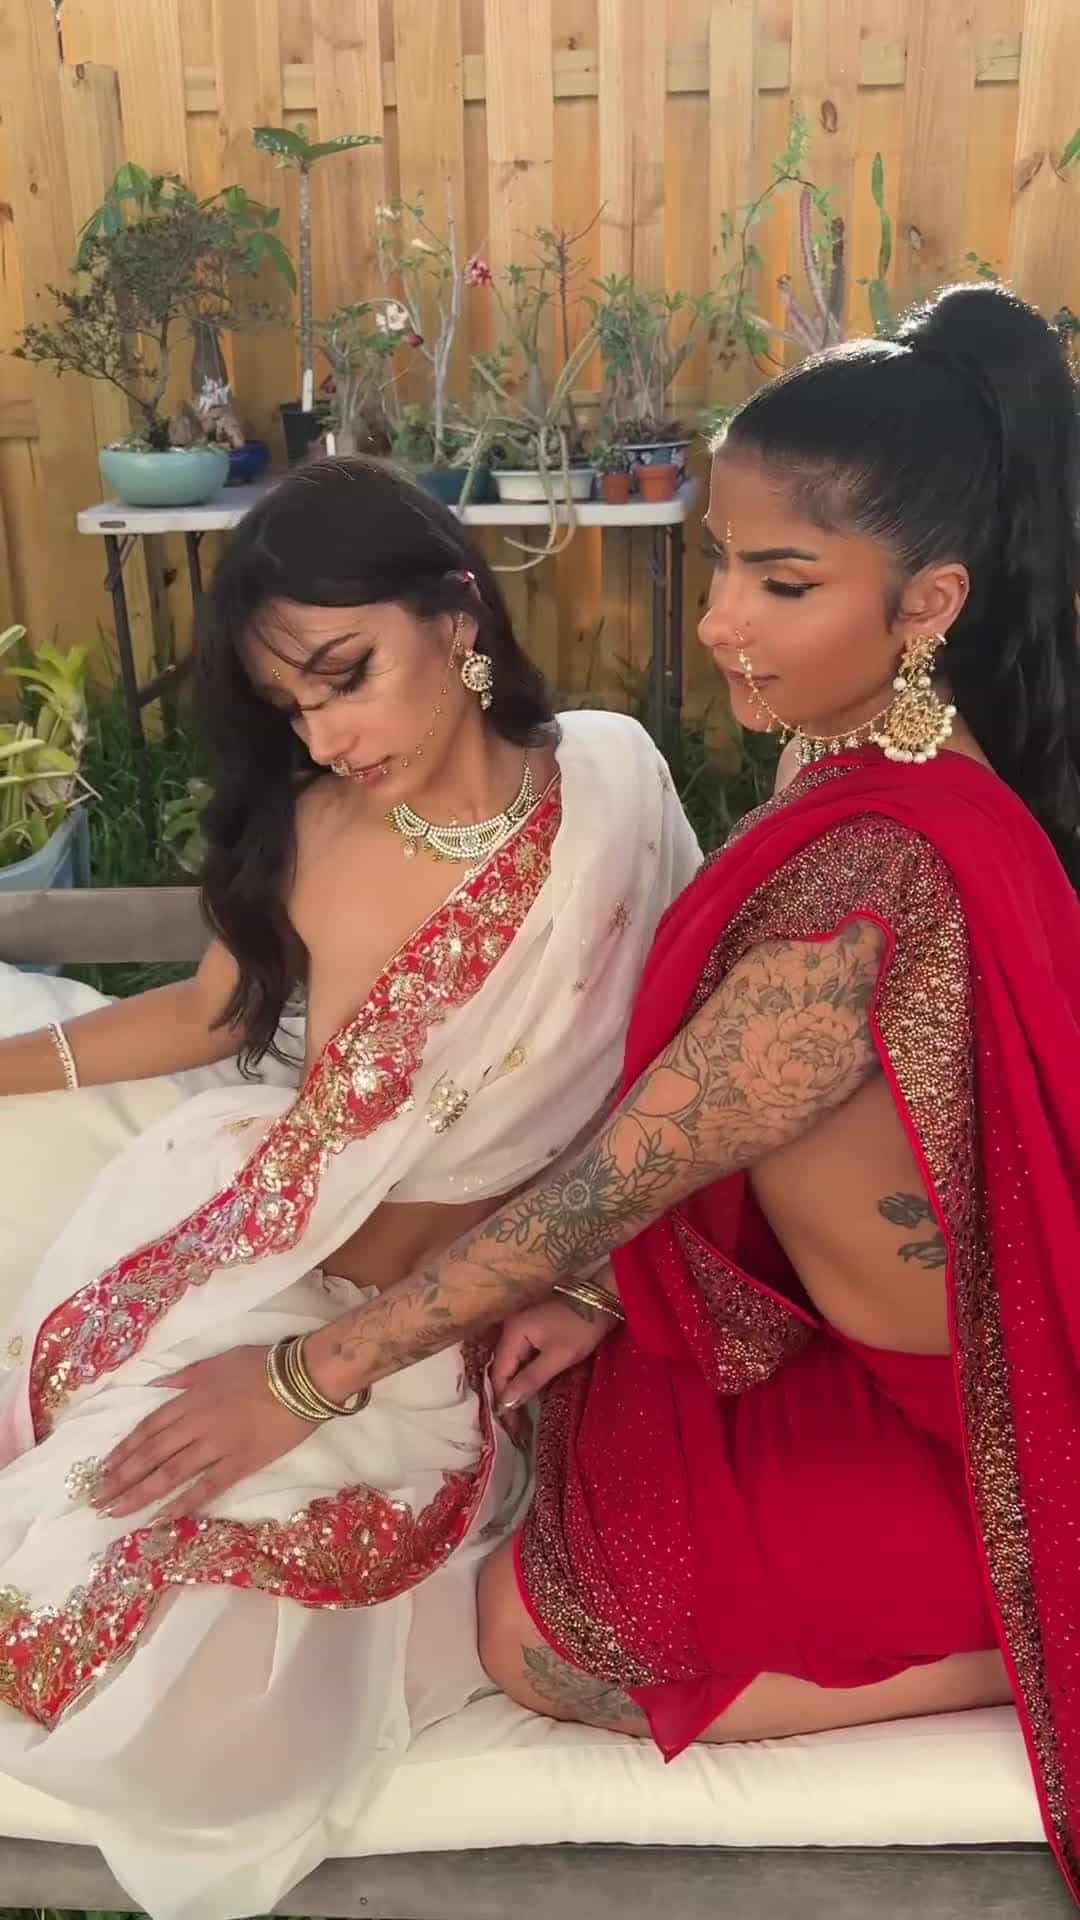 have you ever had a double dose of indian?